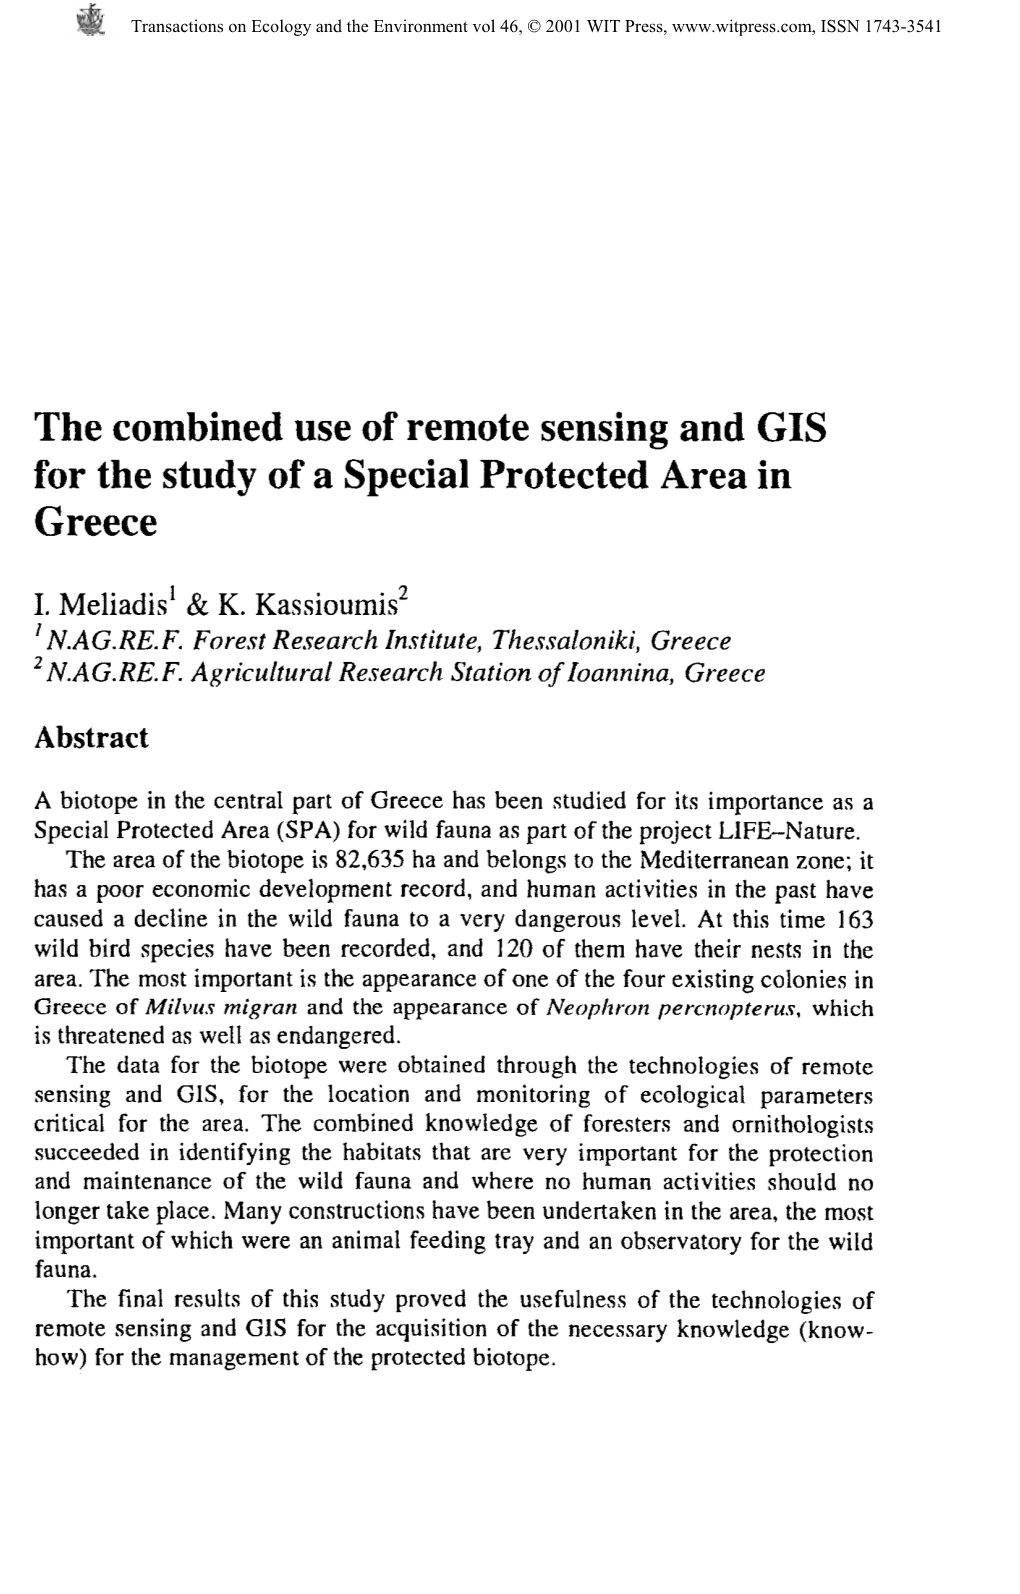 The Combined Use of Remote Sensing and GIS for the Study of a Special Protected Area In